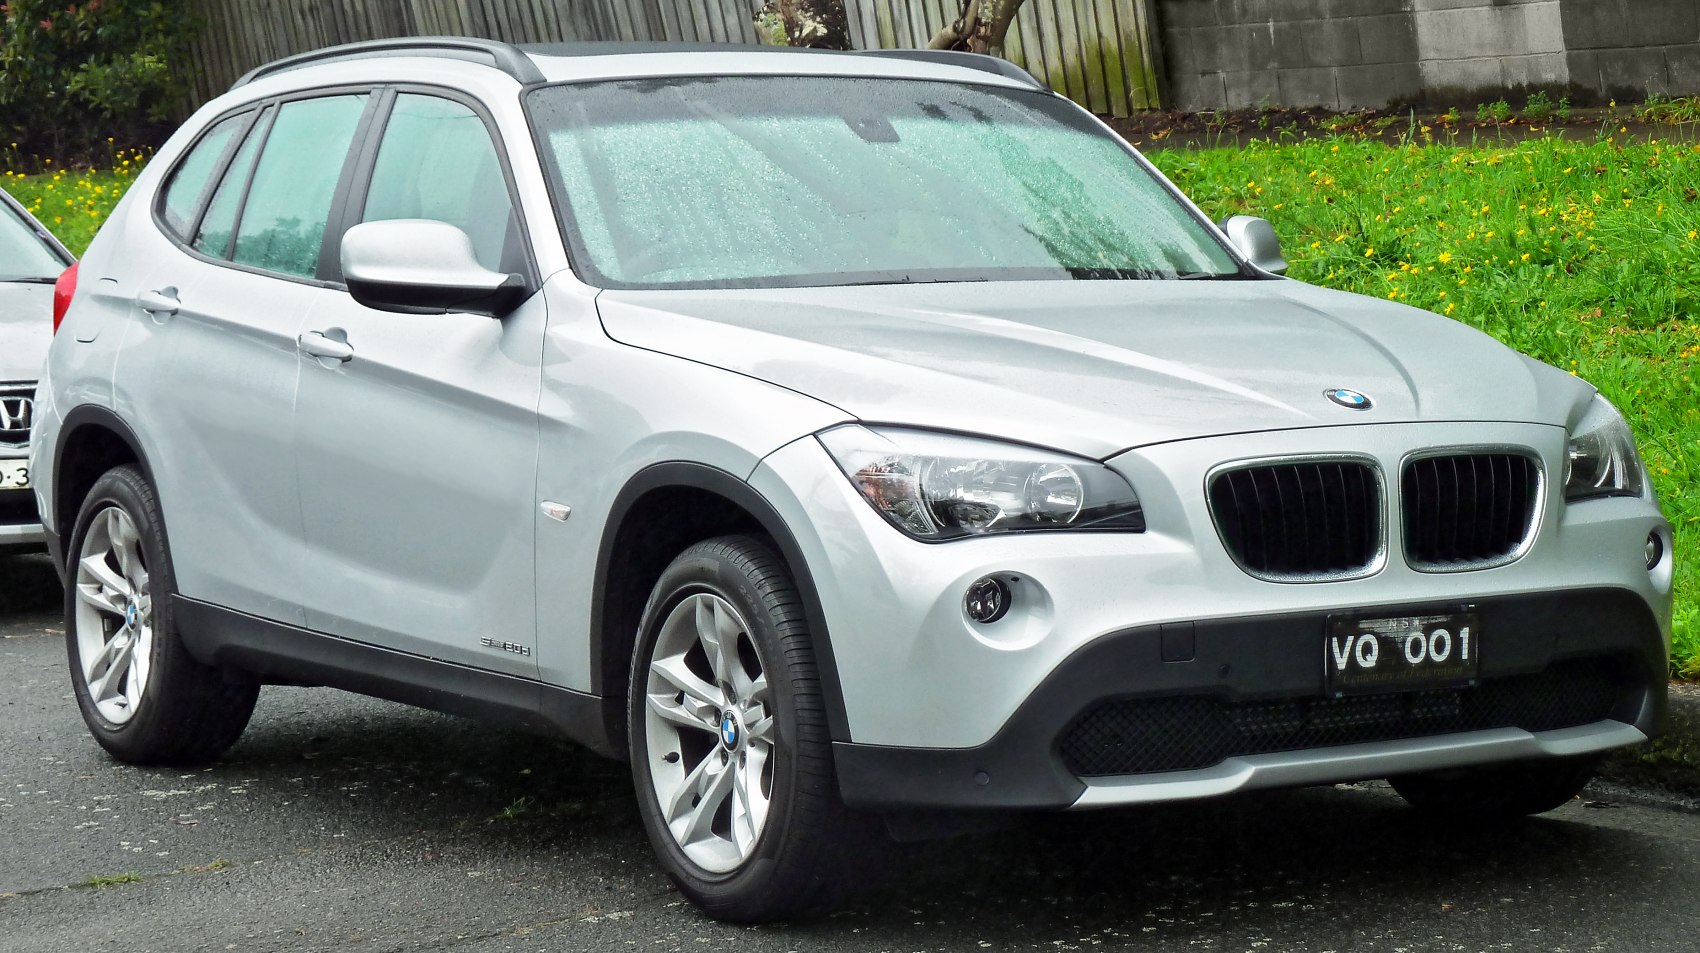 https://totalrenting.es/wp-content/uploads/2022/10/bmw-x1-e84-2009-28i-258-cv-xdrive-crossover.png